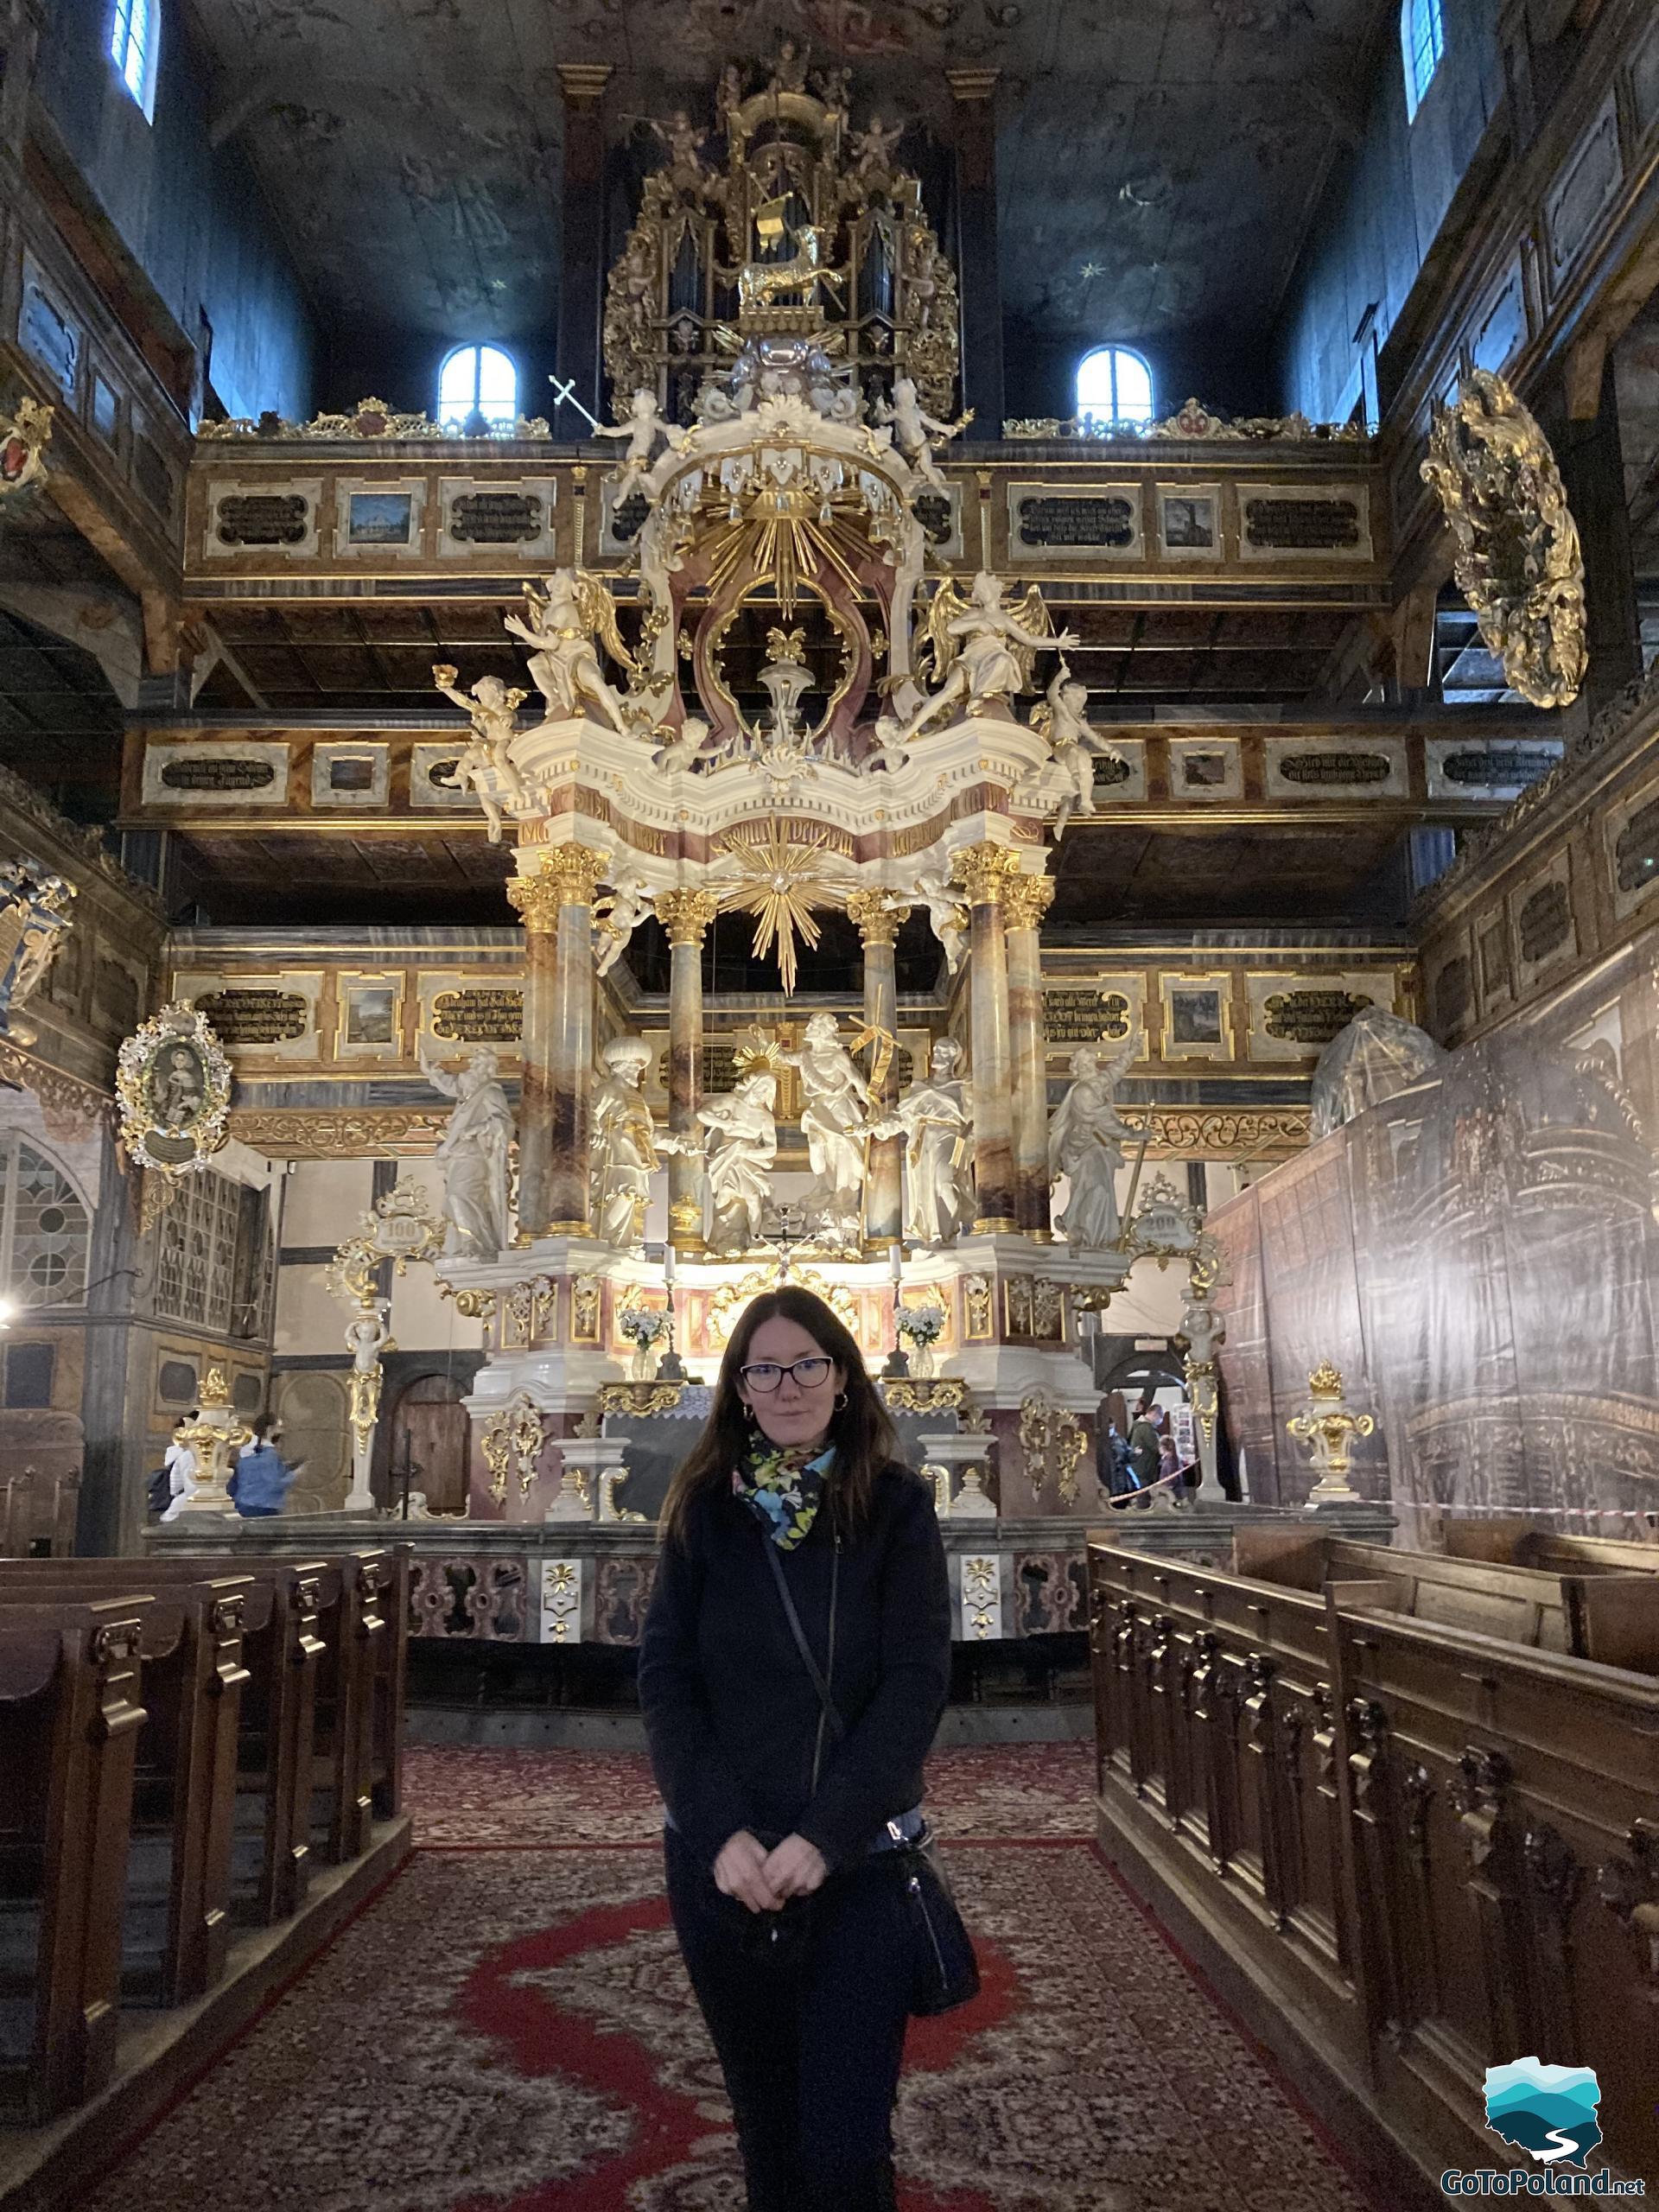 A woman is standing in front of a main altar